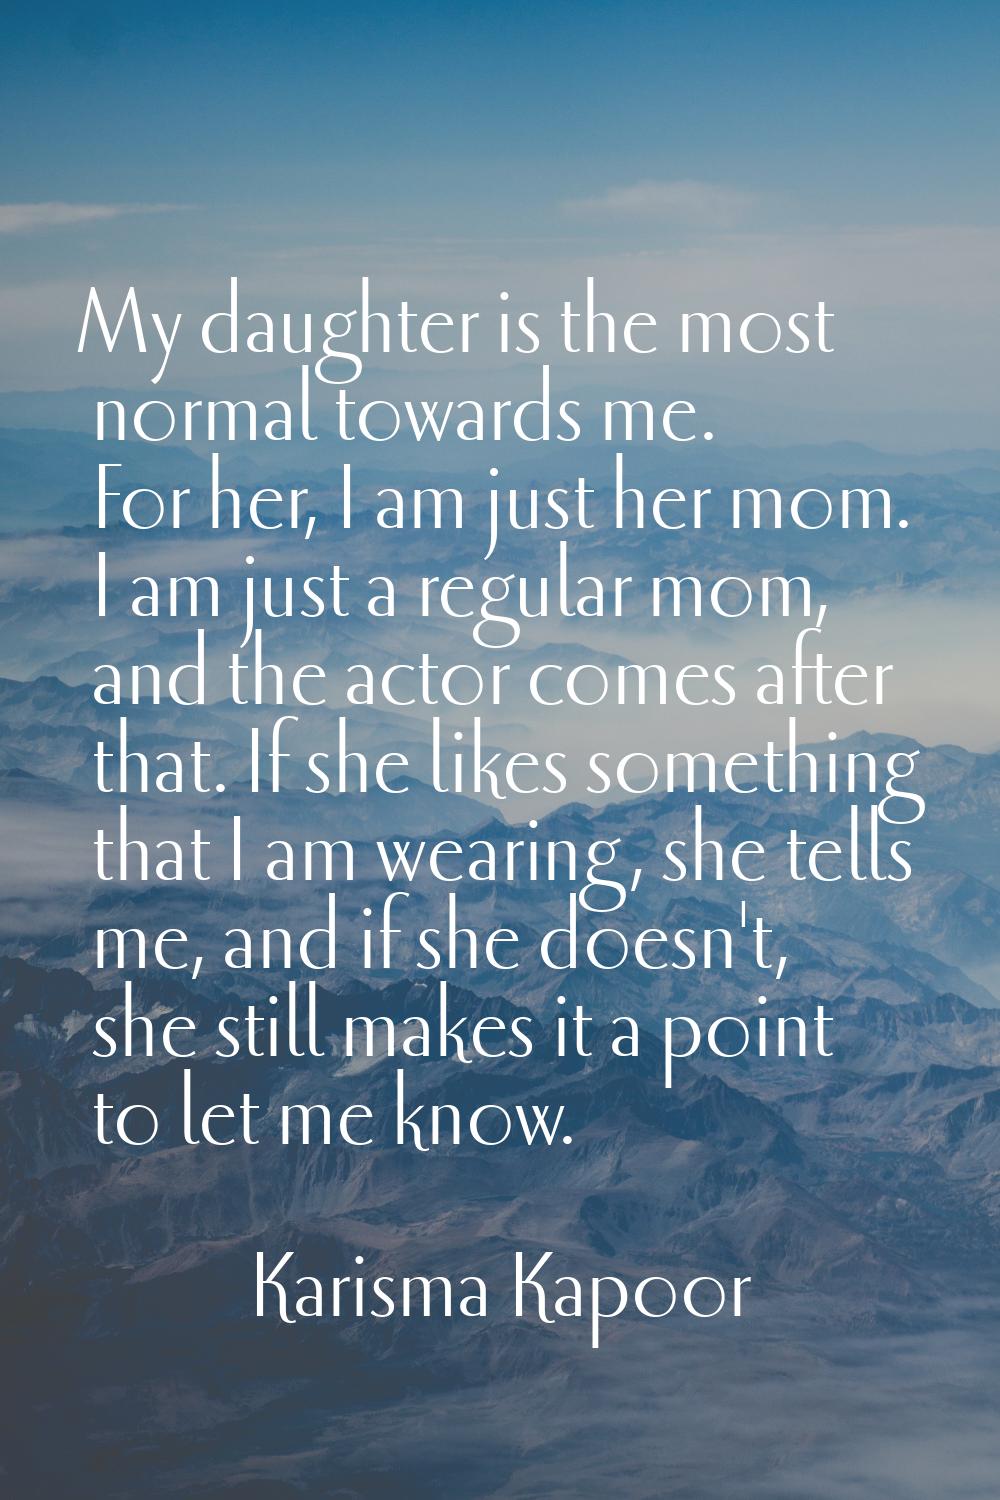 My daughter is the most normal towards me. For her, I am just her mom. I am just a regular mom, and